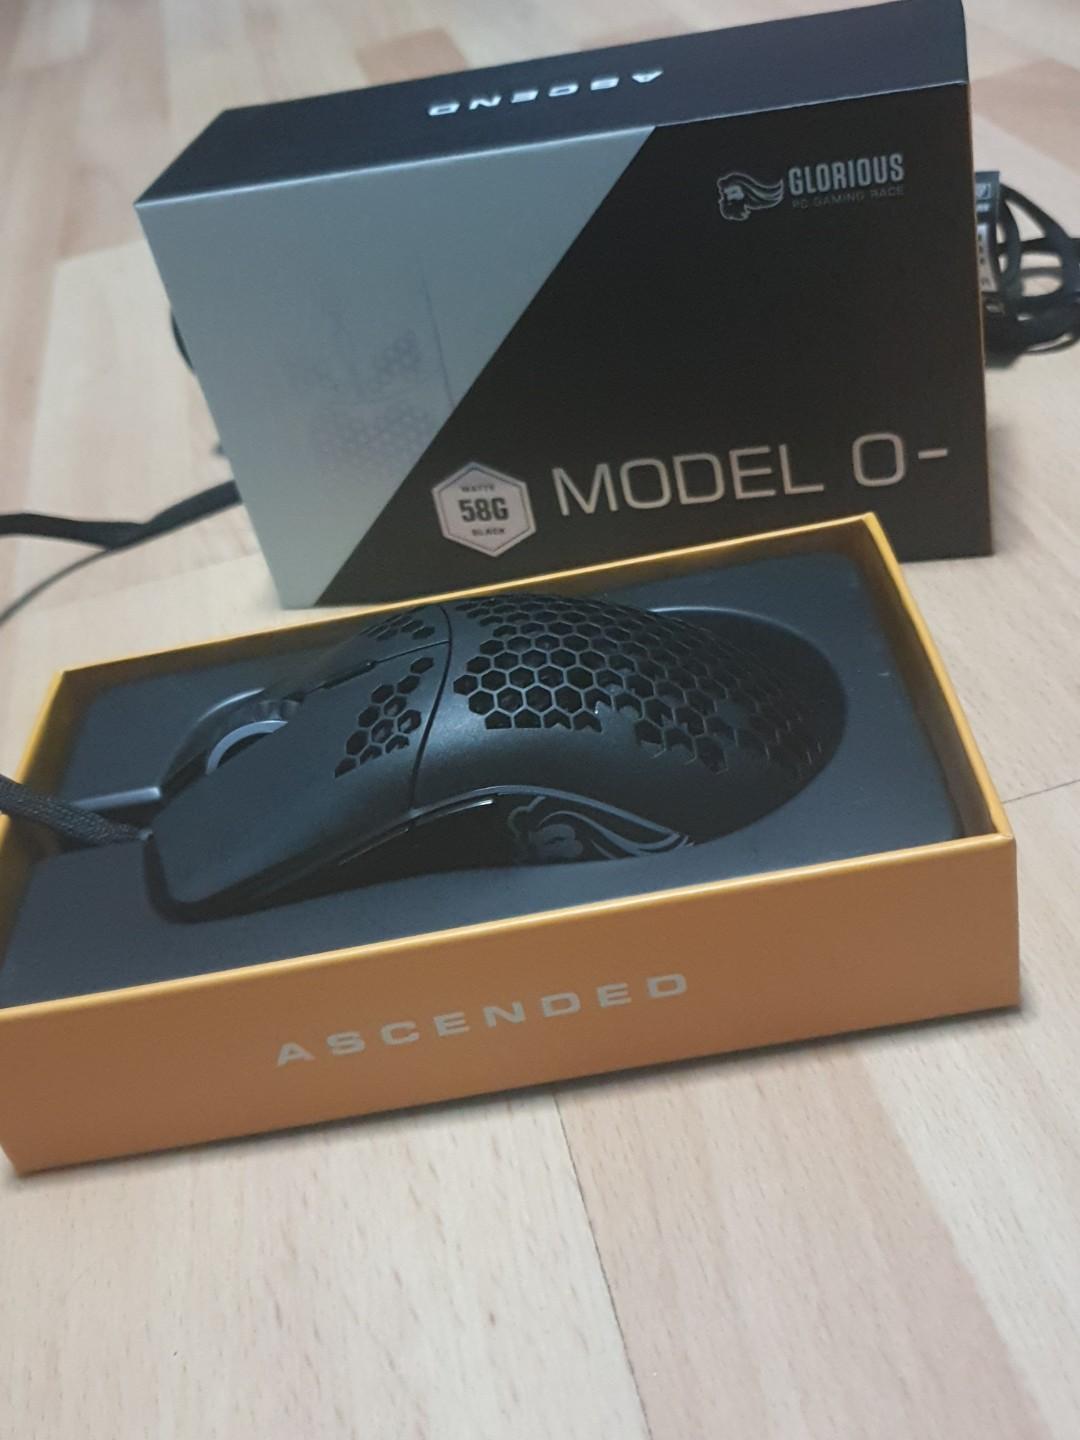 Glorious Model O Minus Gaming Mice Matte Black Electronics Computer Parts Accessories On Carousell